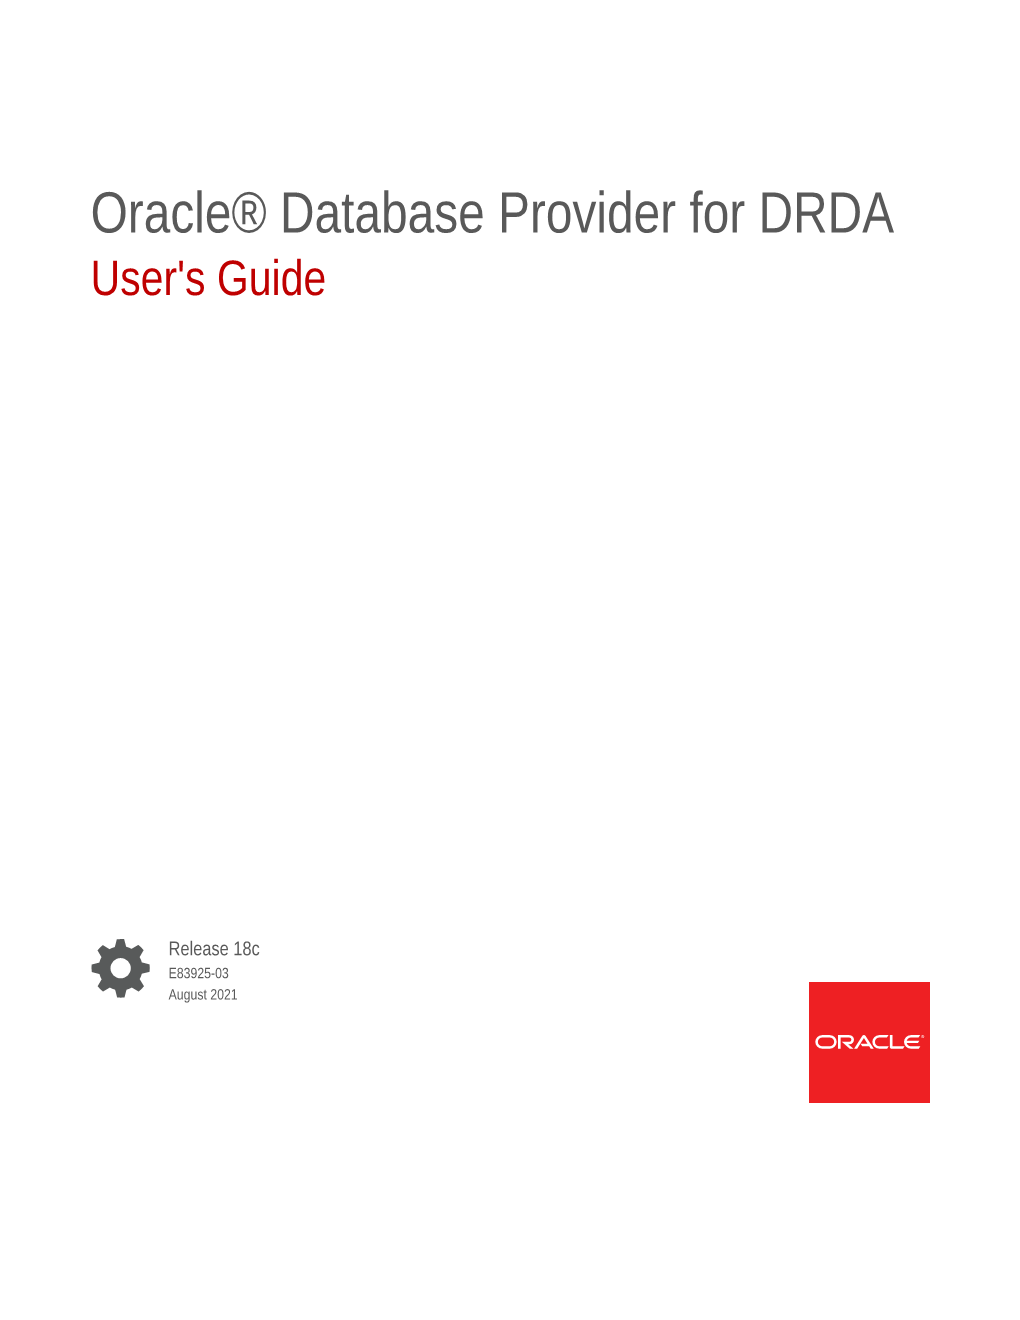 Oracle® Database Provider for DRDA User's Guide